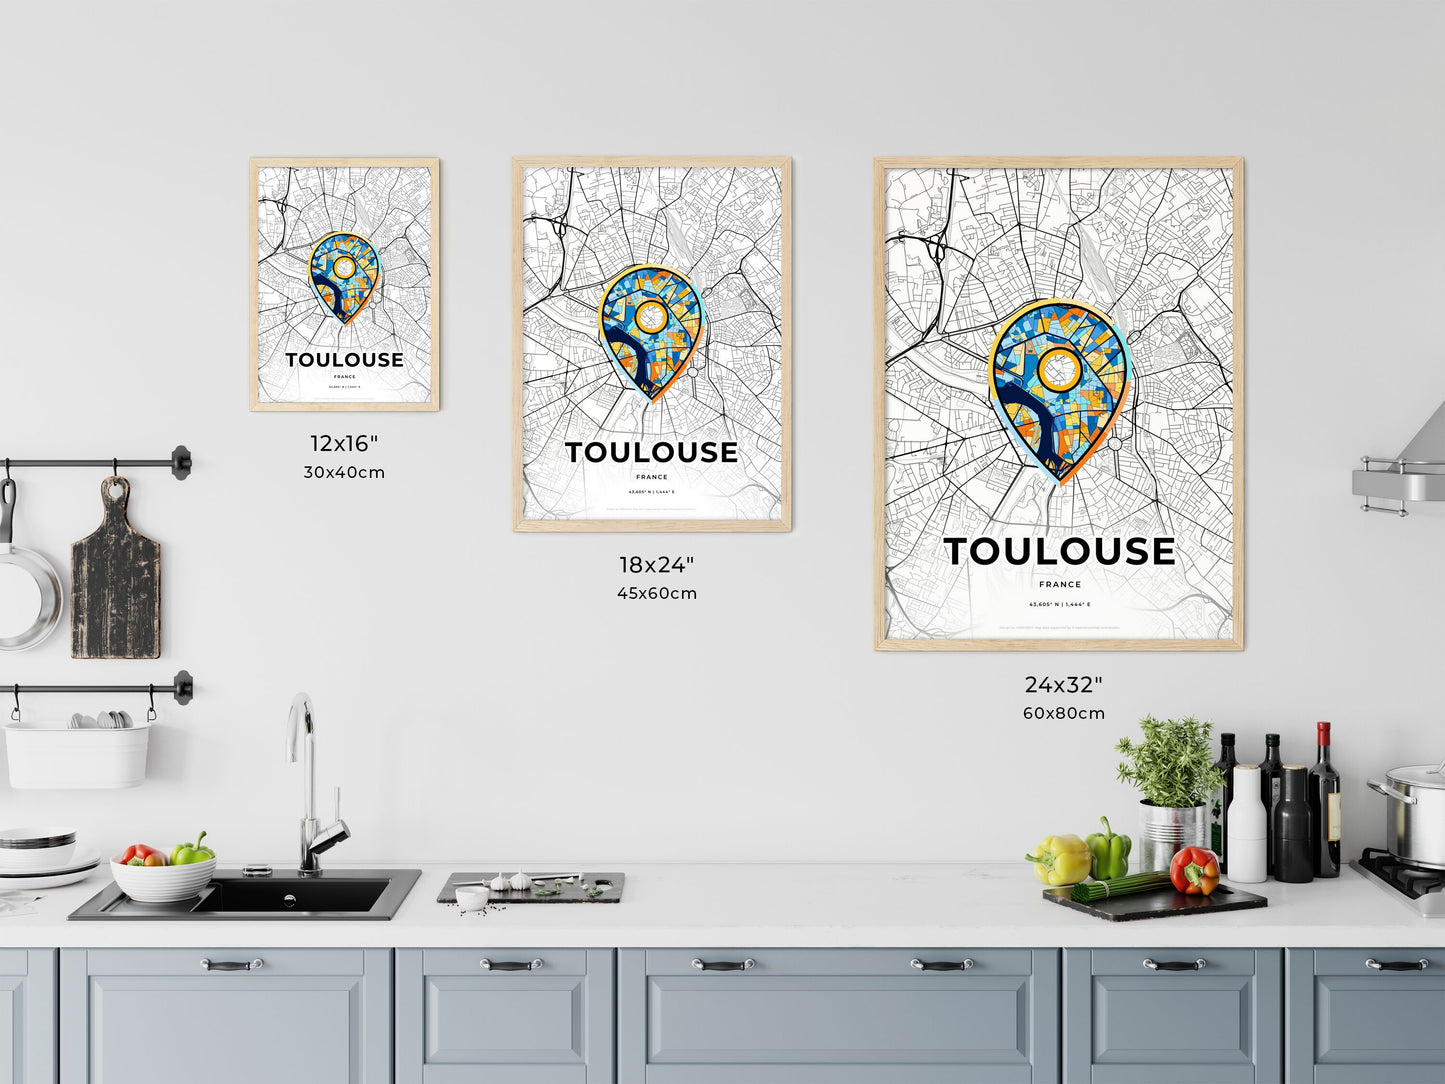 TOULOUSE FRANCE minimal art map with a colorful icon. Where it all began, Couple map gift.